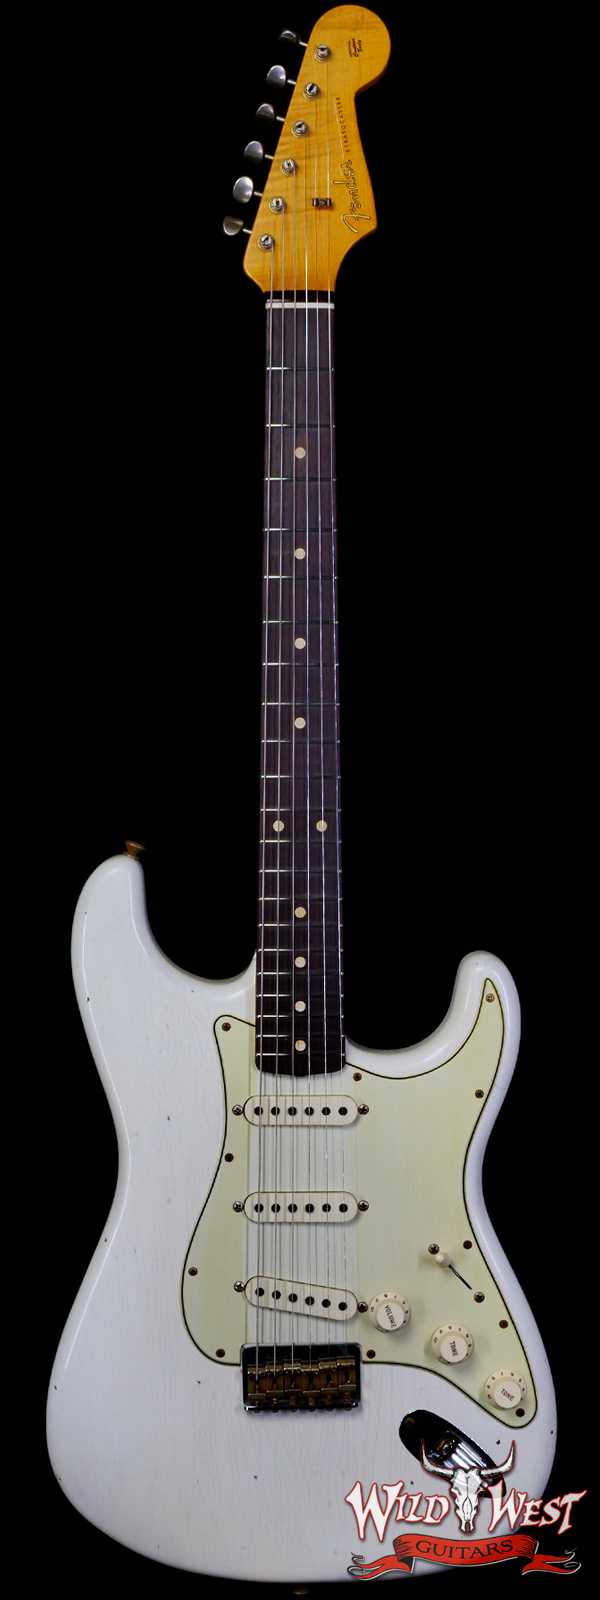 Fender Custom Shop Limited Edition 1961 Stratocaster Hardtail Hand-Wound Pickups AAA Dark Rosewood Slab Board Relic Aged Olympic White